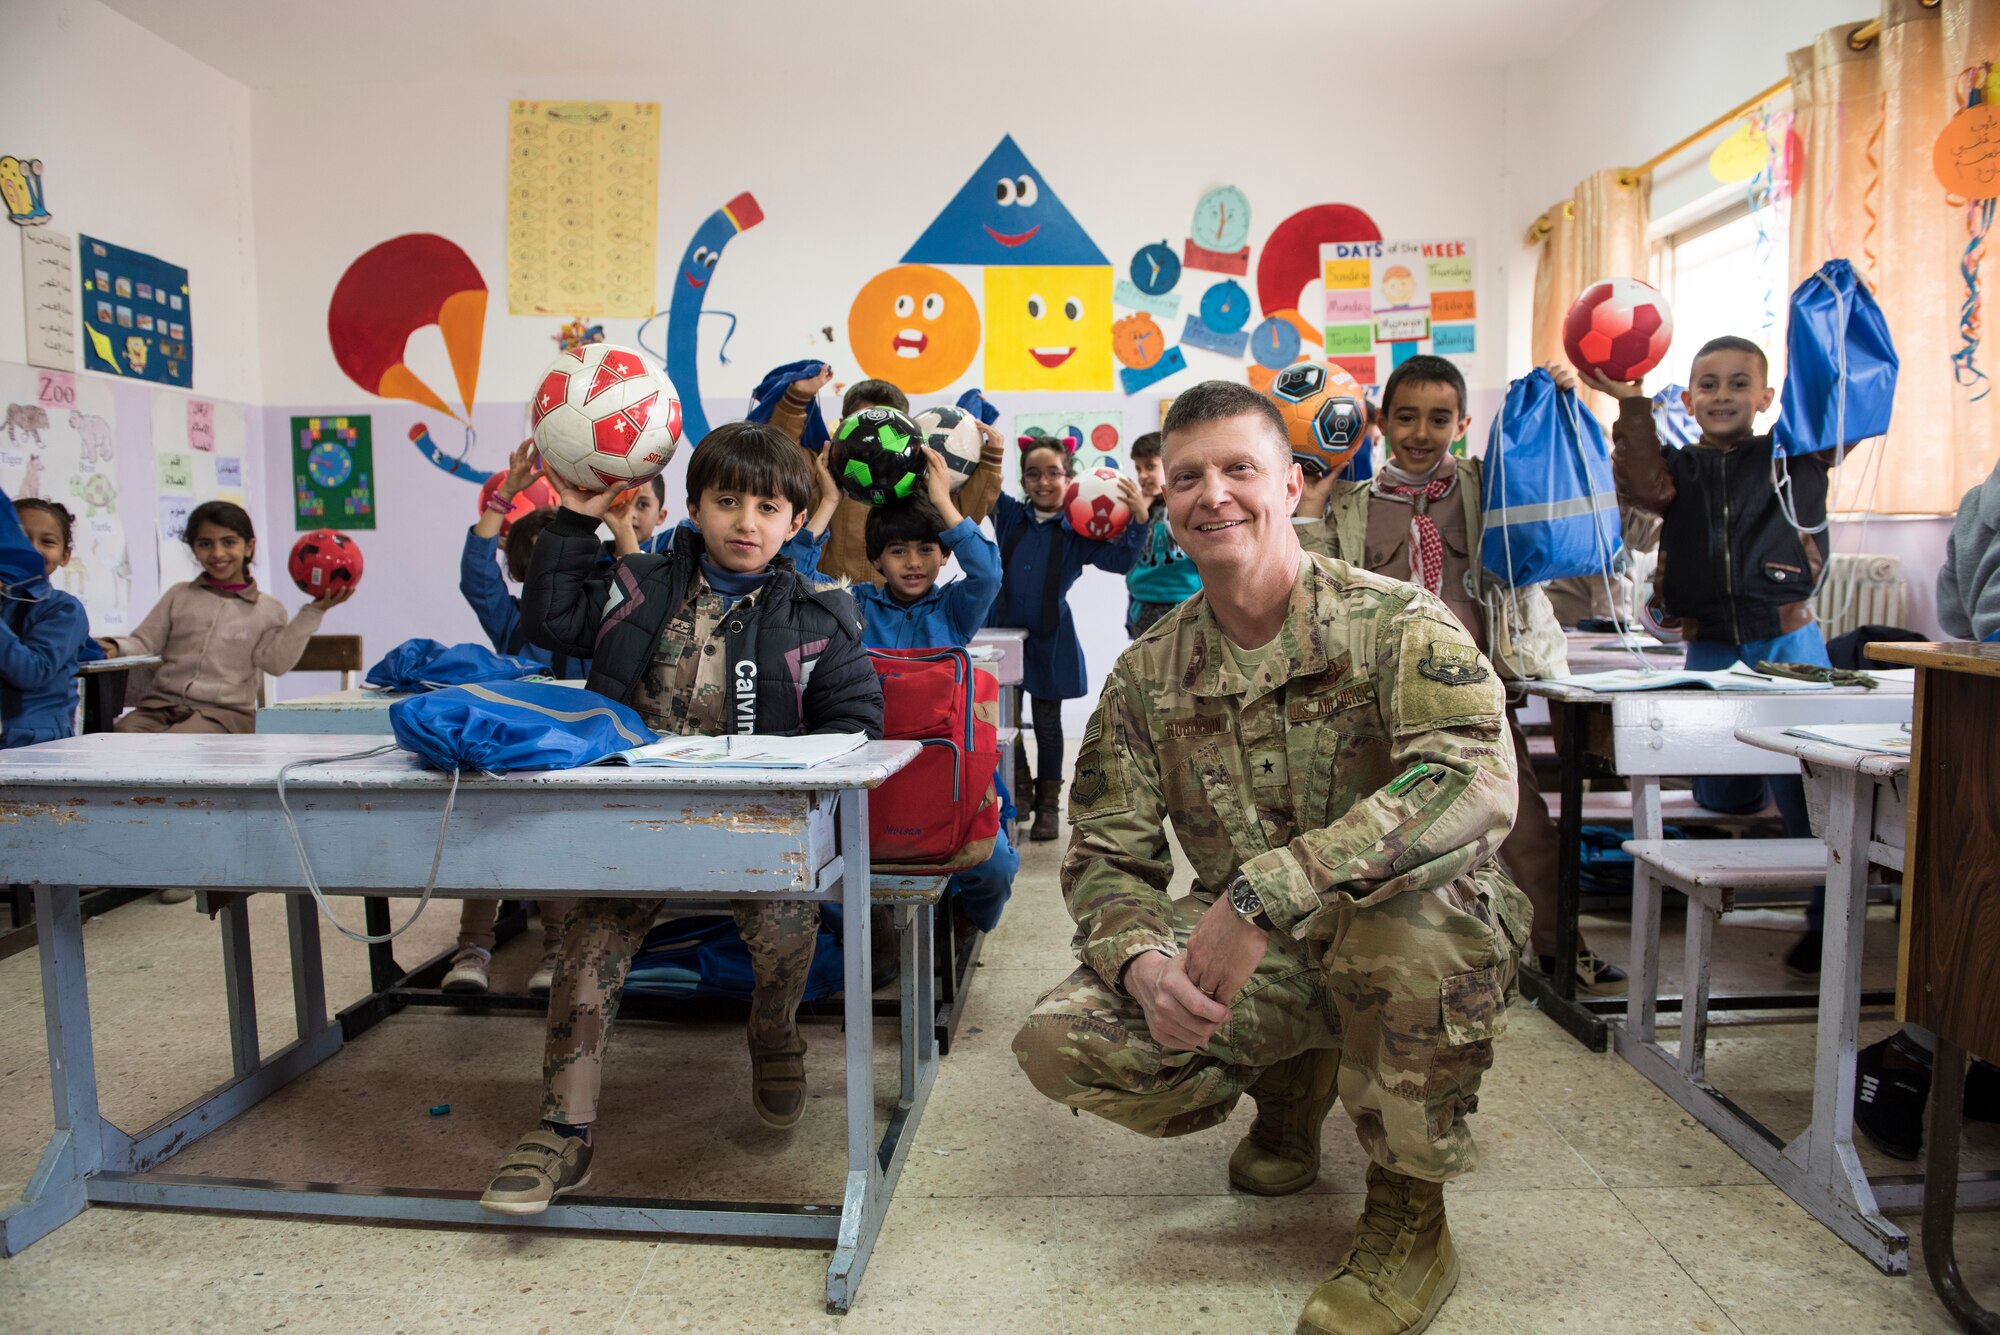 U.S. Air Force Brig. Gen. Kyle Robinson, 332d Air Expeditionary Wing commander, poses with school children during a donation drop-off February 26, 2018, at an undisclosed location. The project, named, “Care for Kids,” was a combined effort between service members and their friends and family back home, with the goal of providing school and sports equipment to two schools and a refugee camp. (U.S. Air Force photo by Staff Sgt. Joshua Kleinholz